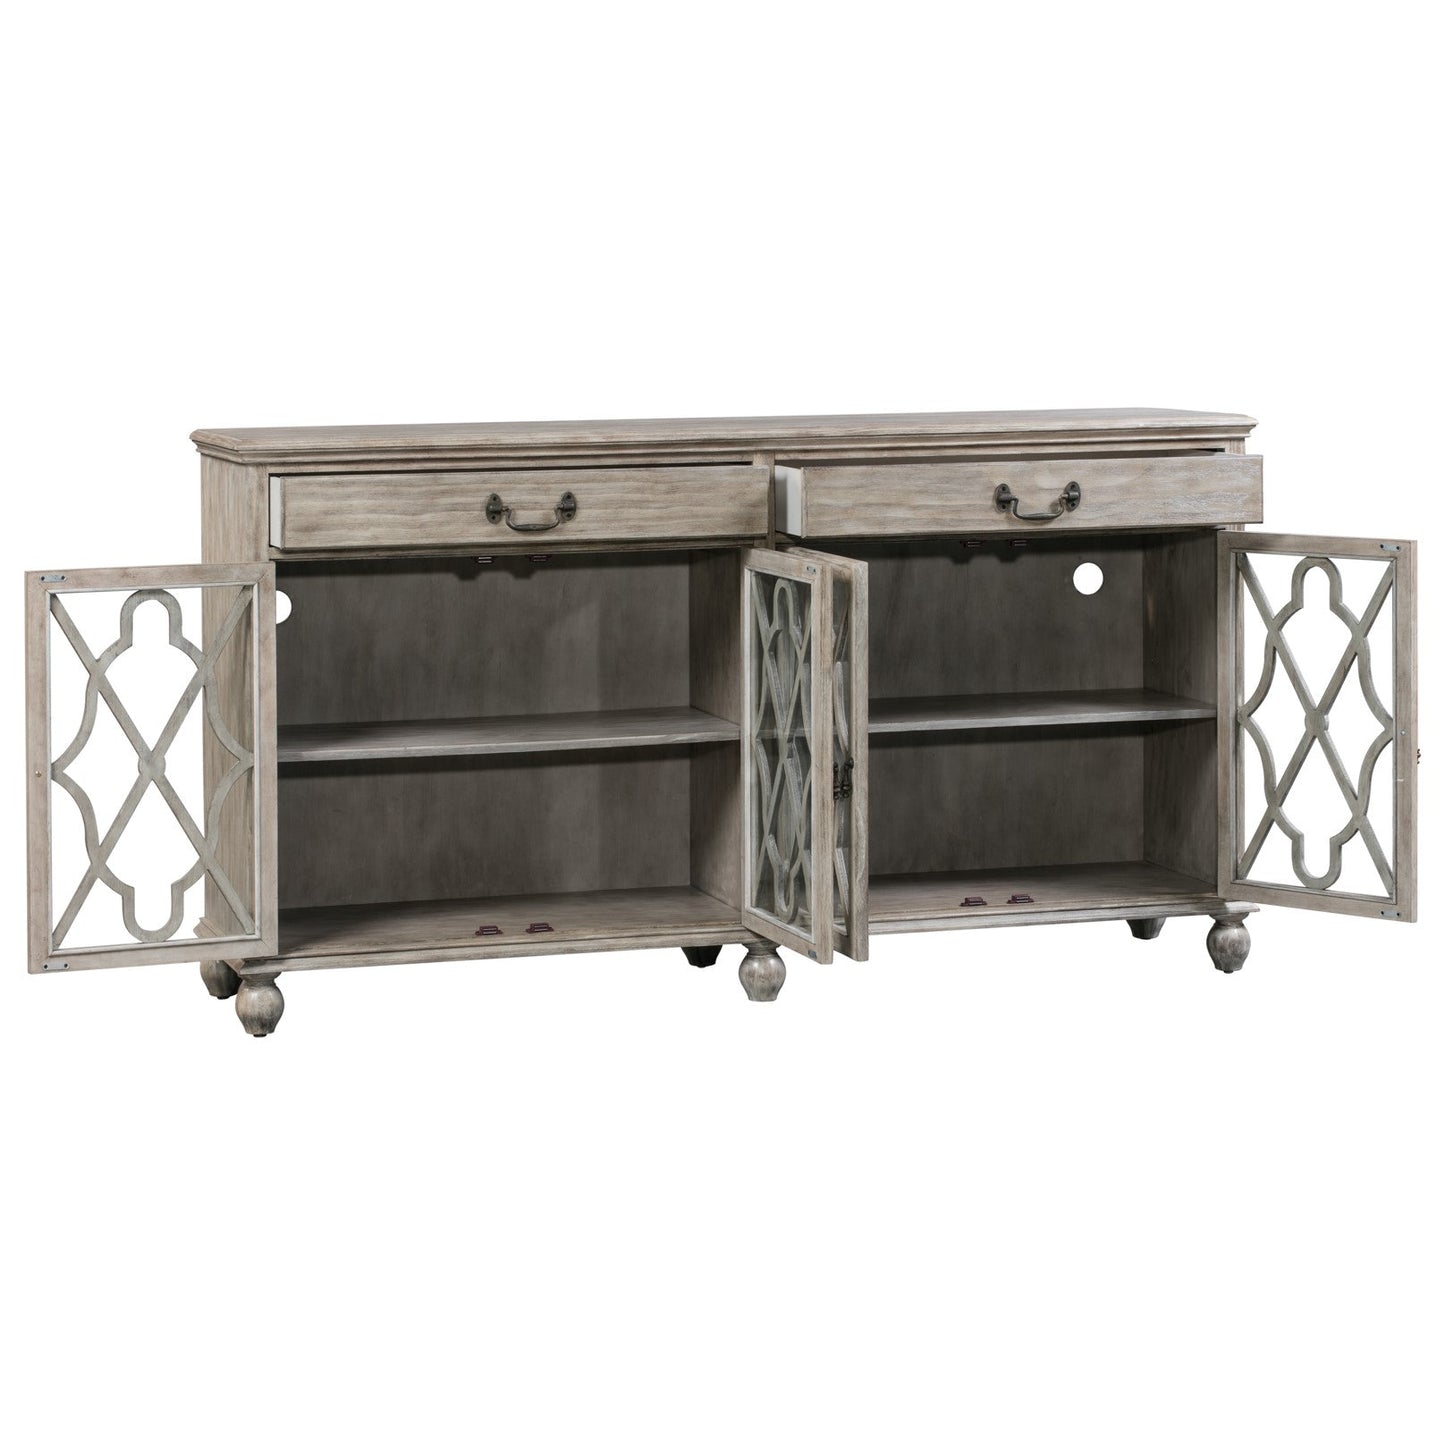 Crestview Collection Hawthorne Estate 72" x 18" x 39" 2-Drawer 4-Door Traditional Gray Wood Fretwork Sideboard